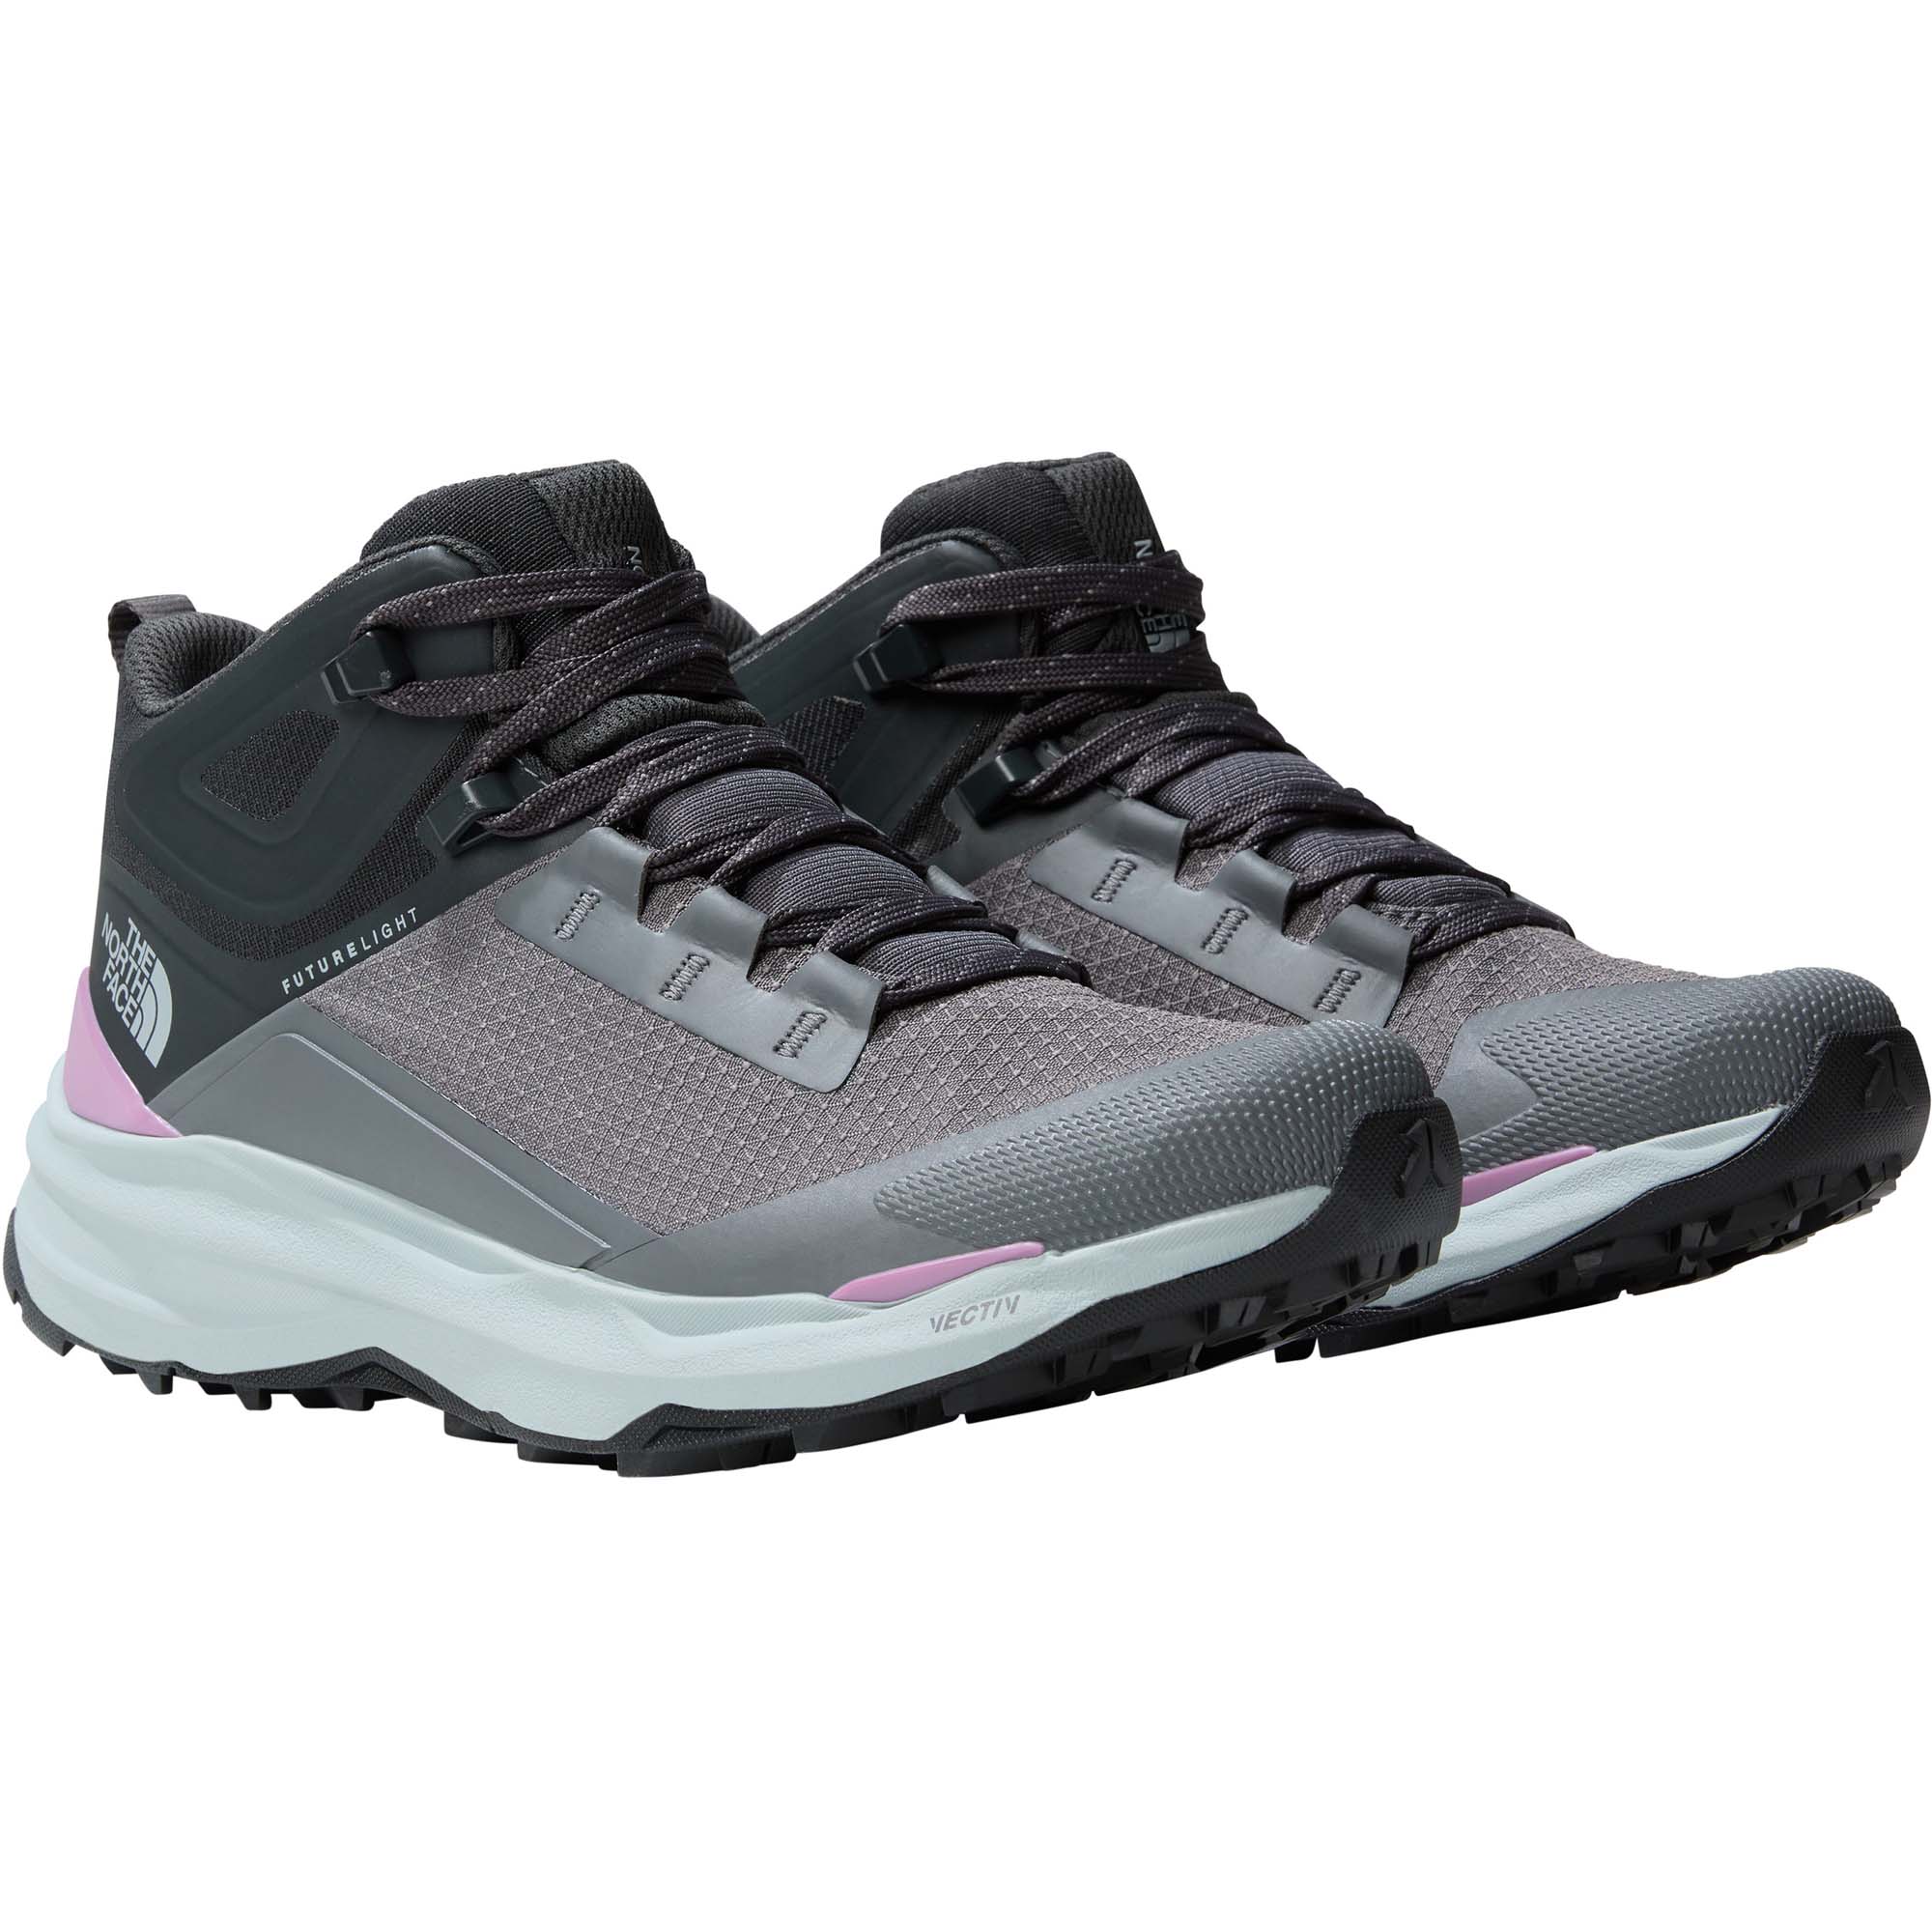 The North Face Vectiv Exploris 2 Mid FTL Women's Hiking Boots